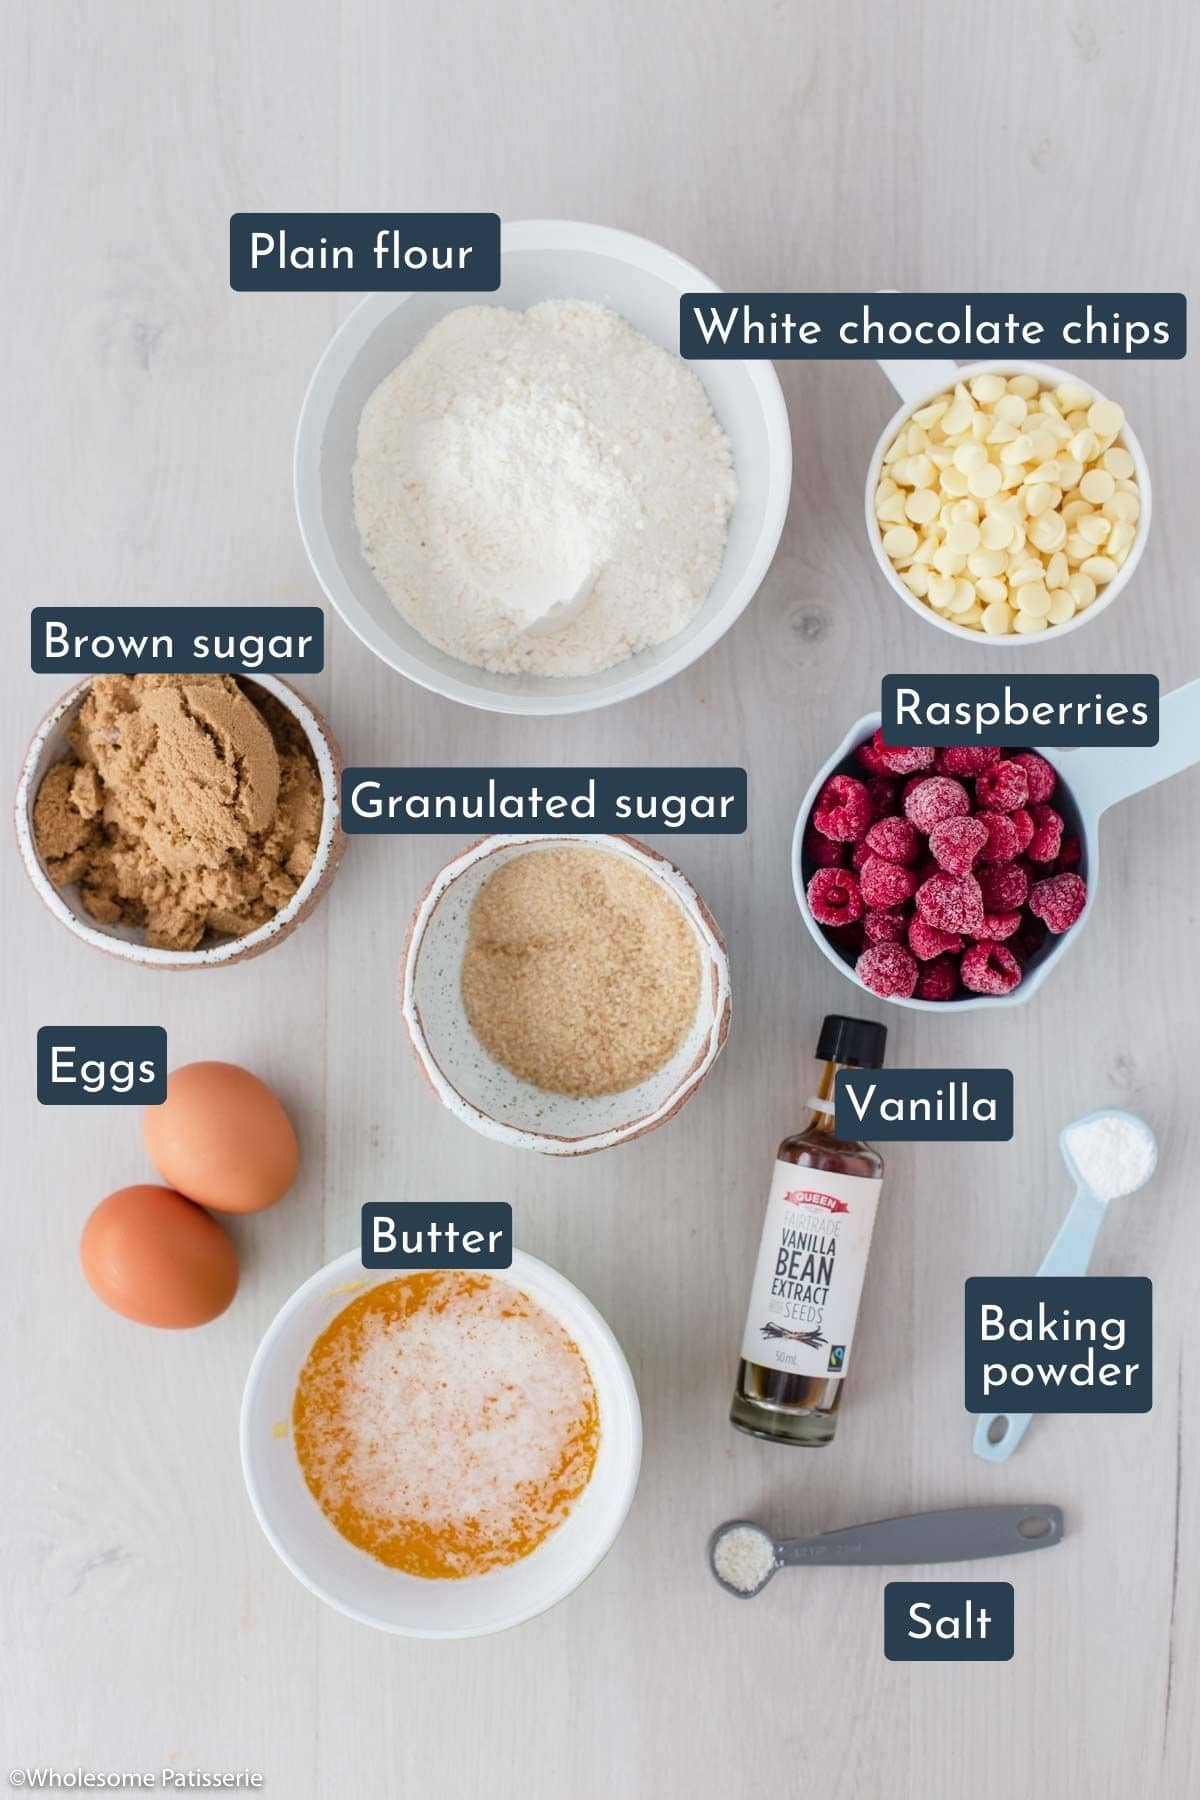 Ingredients to make these blondies is all-purpose flour, white chocolate chips, unsalted block butter, granulated sugar, brown sugar, frozen or fresh raspberries, vanilla extract, eggs, baking powder and salt.